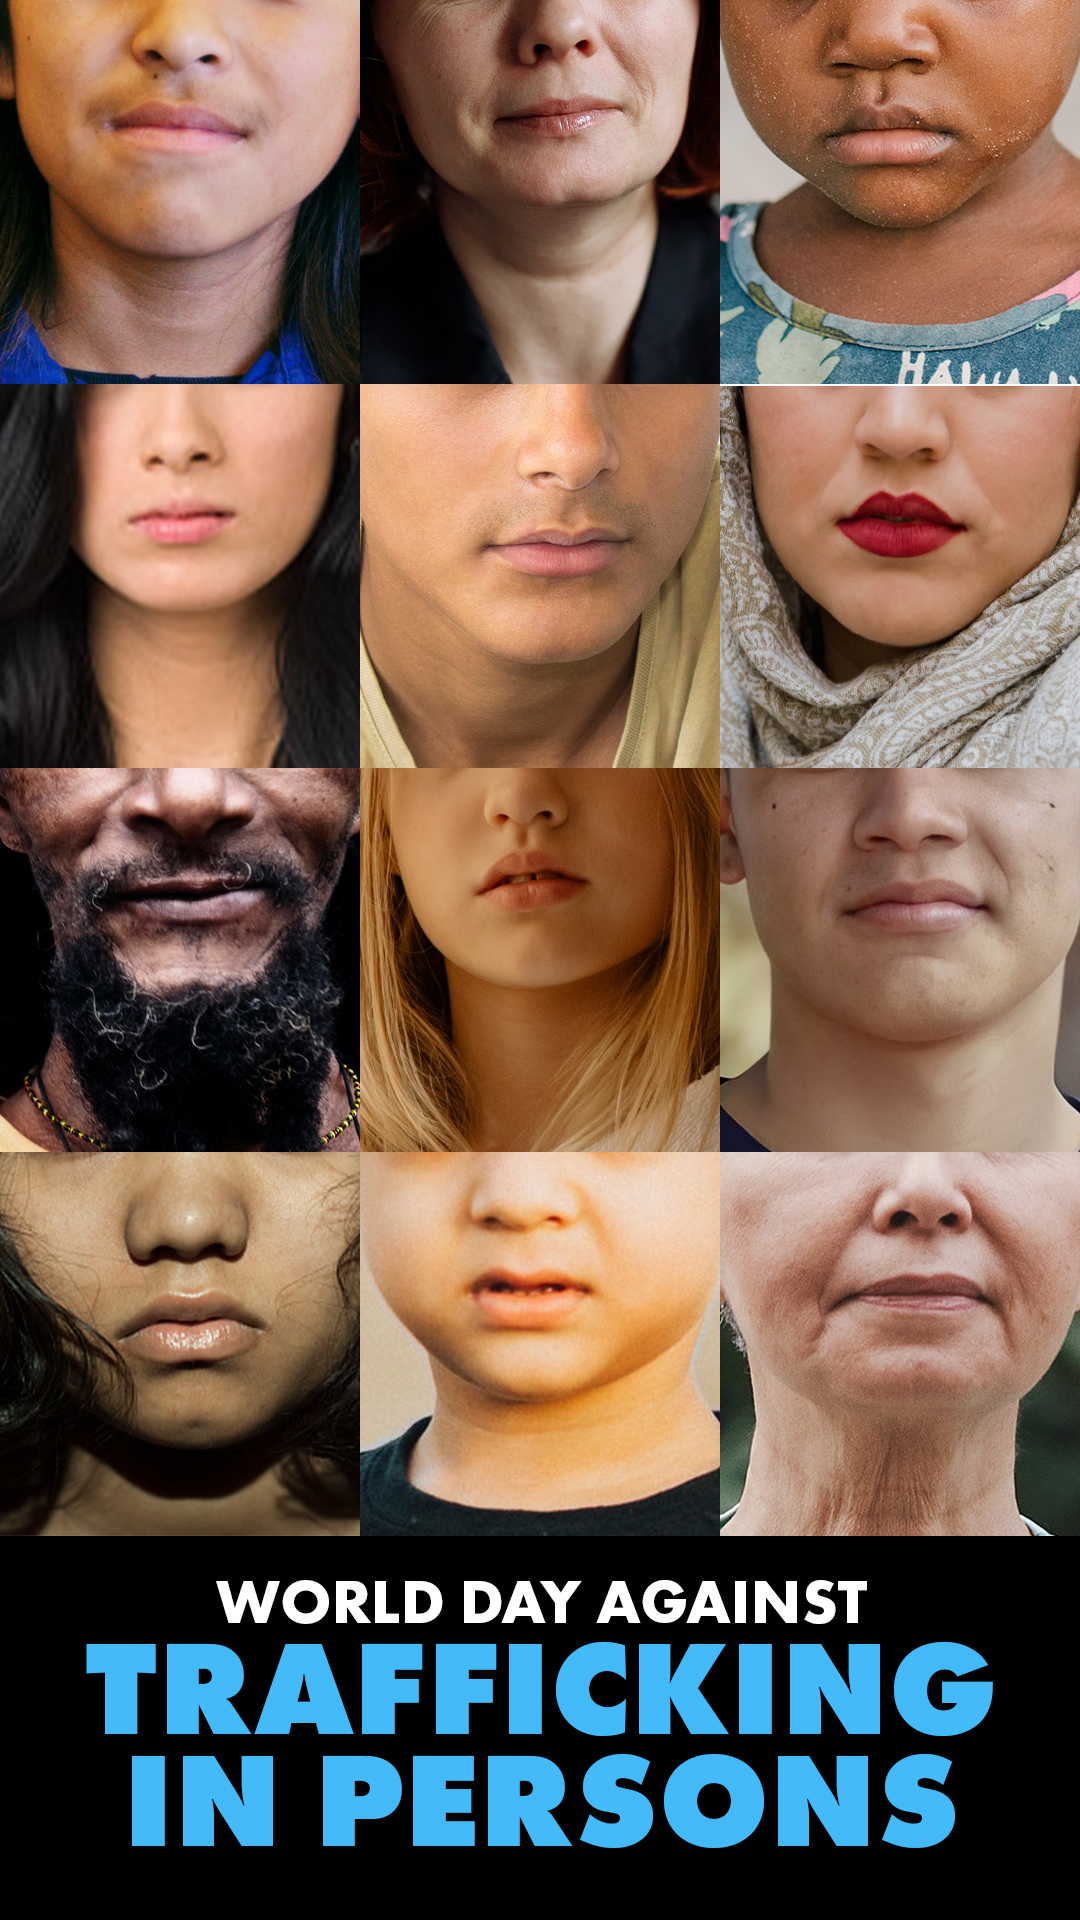 Many different faces featuring just below their eyes. There is text that reads "World Day Against Trafficking in Persons"